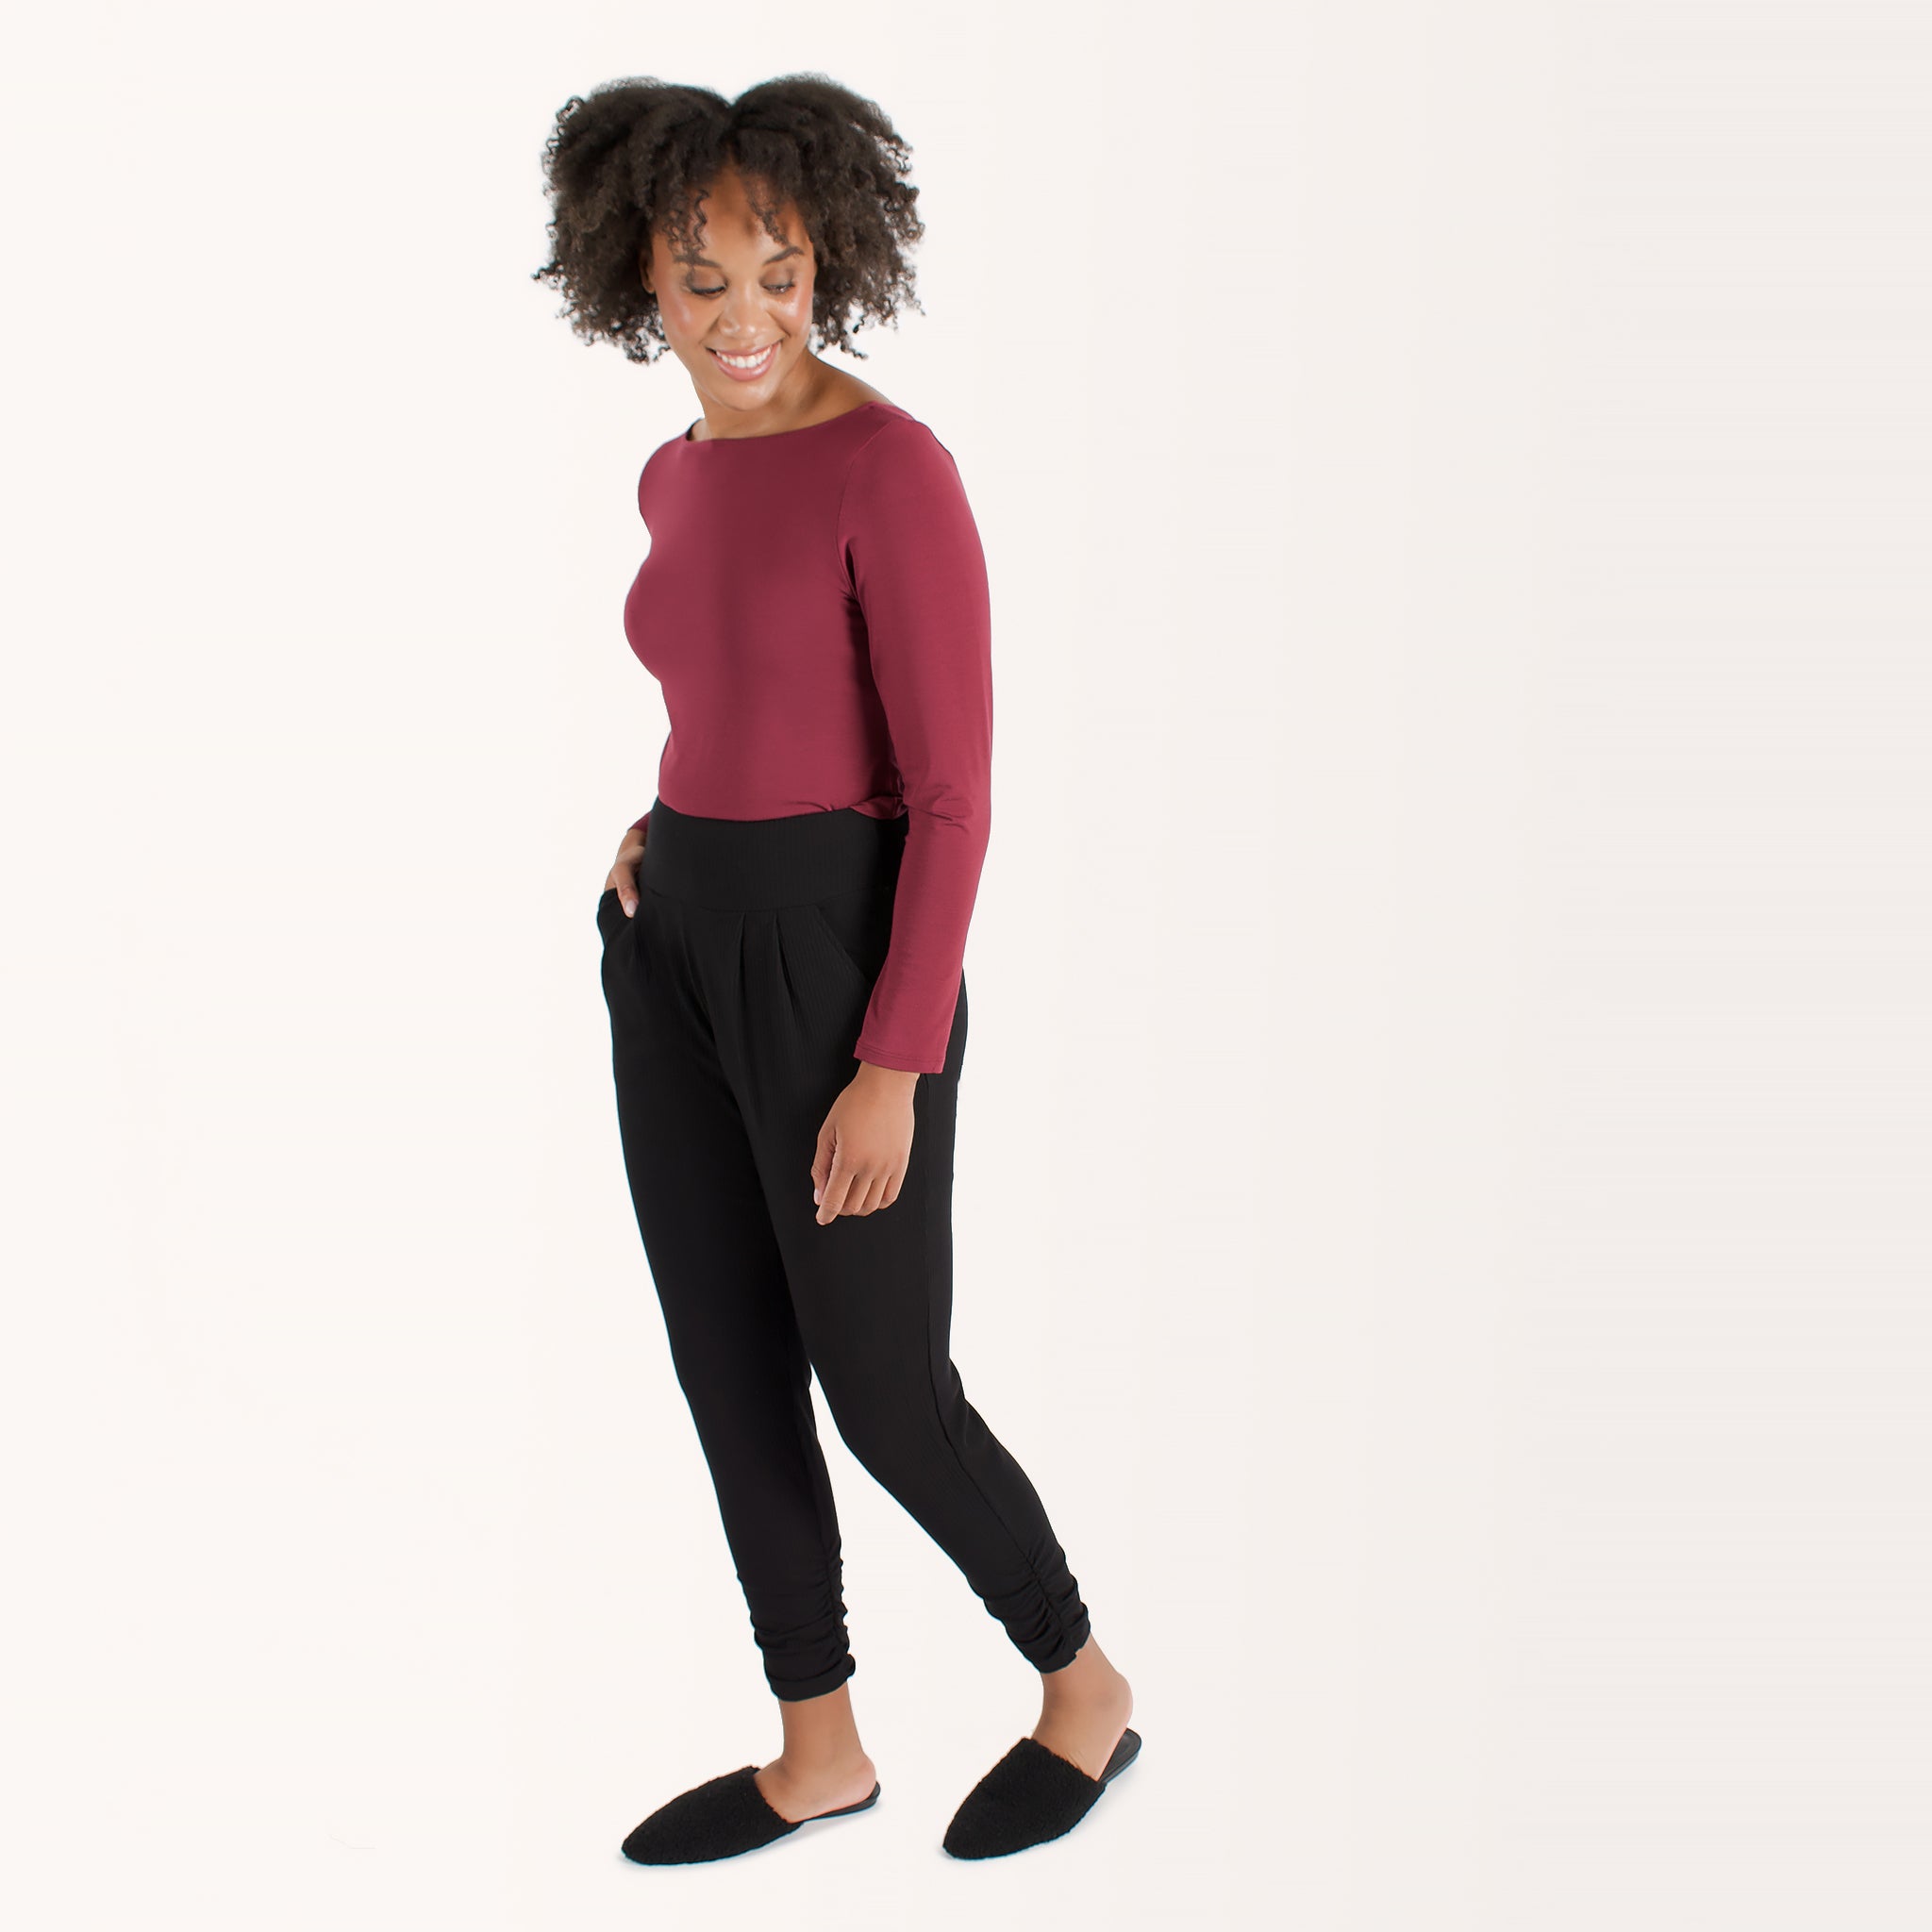 Woman wearing cherry red form fitting long sleeve reversible top with either a scoop neckline or horizontal neckline paired with black fitted sweatpant